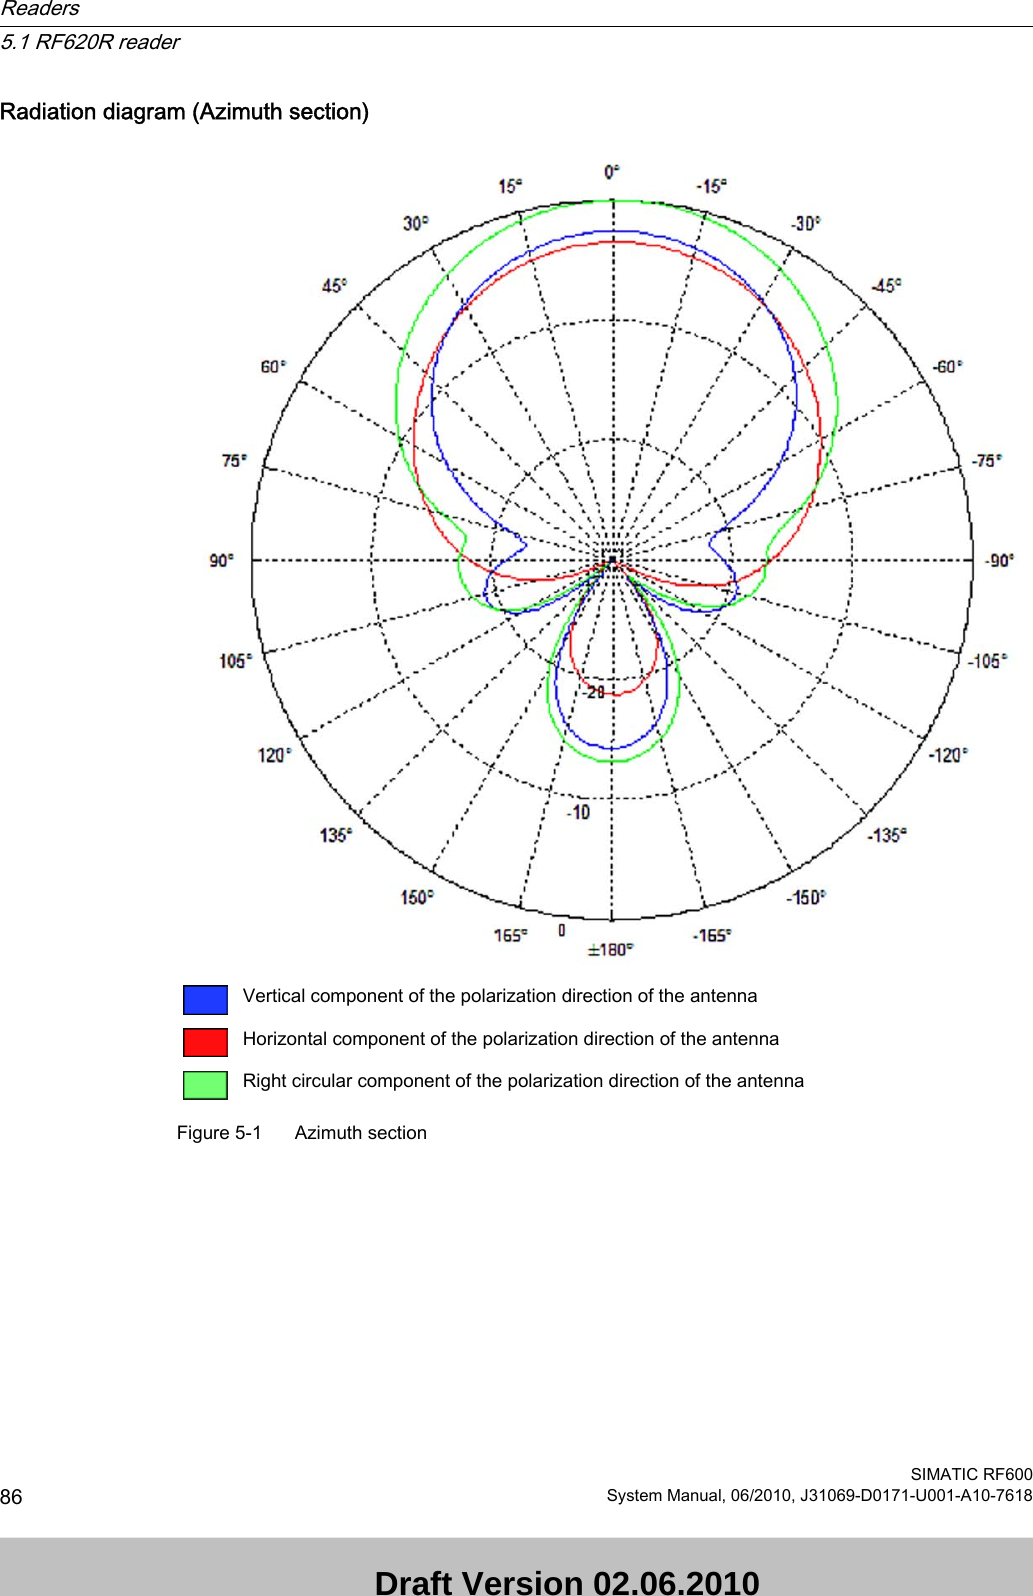 Radiation diagram (Azimuth section)Vertical component of the polarization direction of the antennaHorizontal component of the polarization direction of the antennaRight circular component of the polarization direction of the antennaFigure 5-1 Azimuth sectionReaders5.1 RF620R readerSIMATIC RF60086 System Manual, 06/2010, J31069-D0171-U001-A10-7618 Draft Version 02.06.2010 